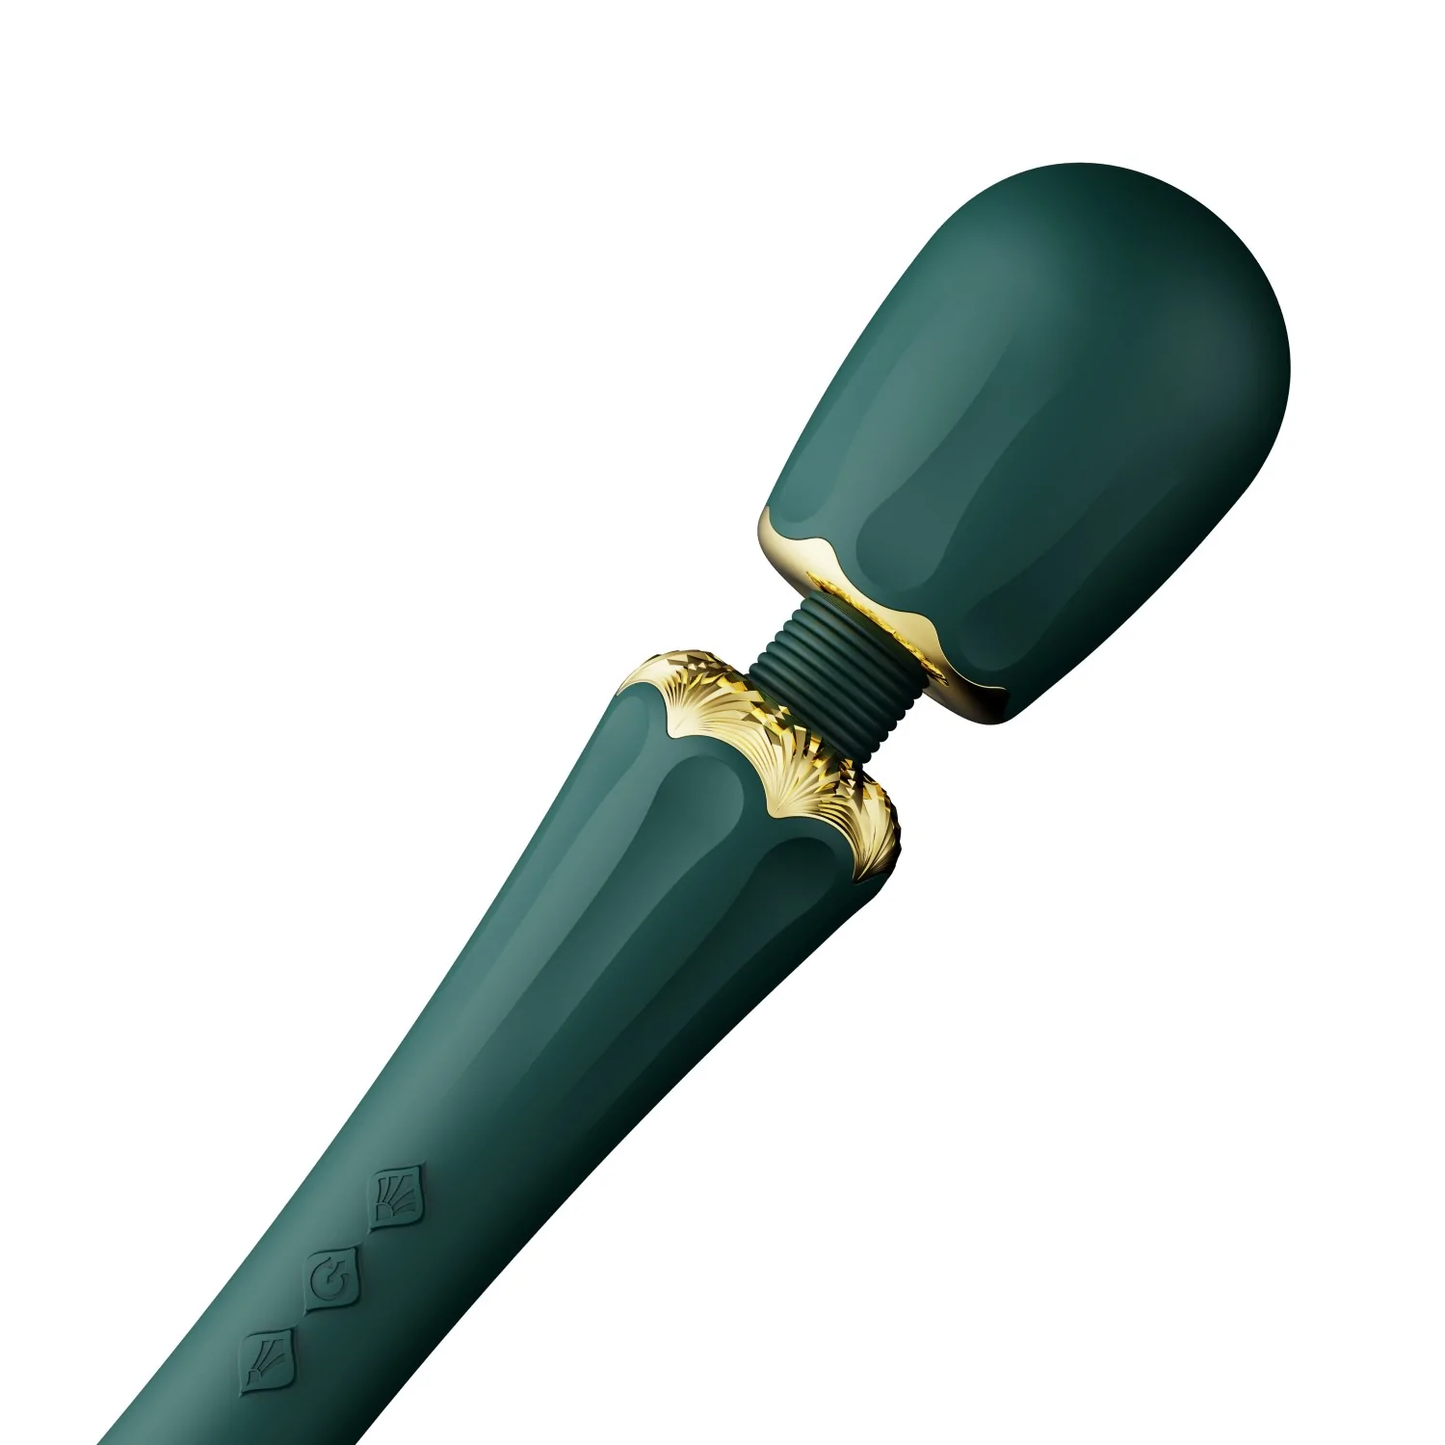 Kyro Wand Massager with Attachments